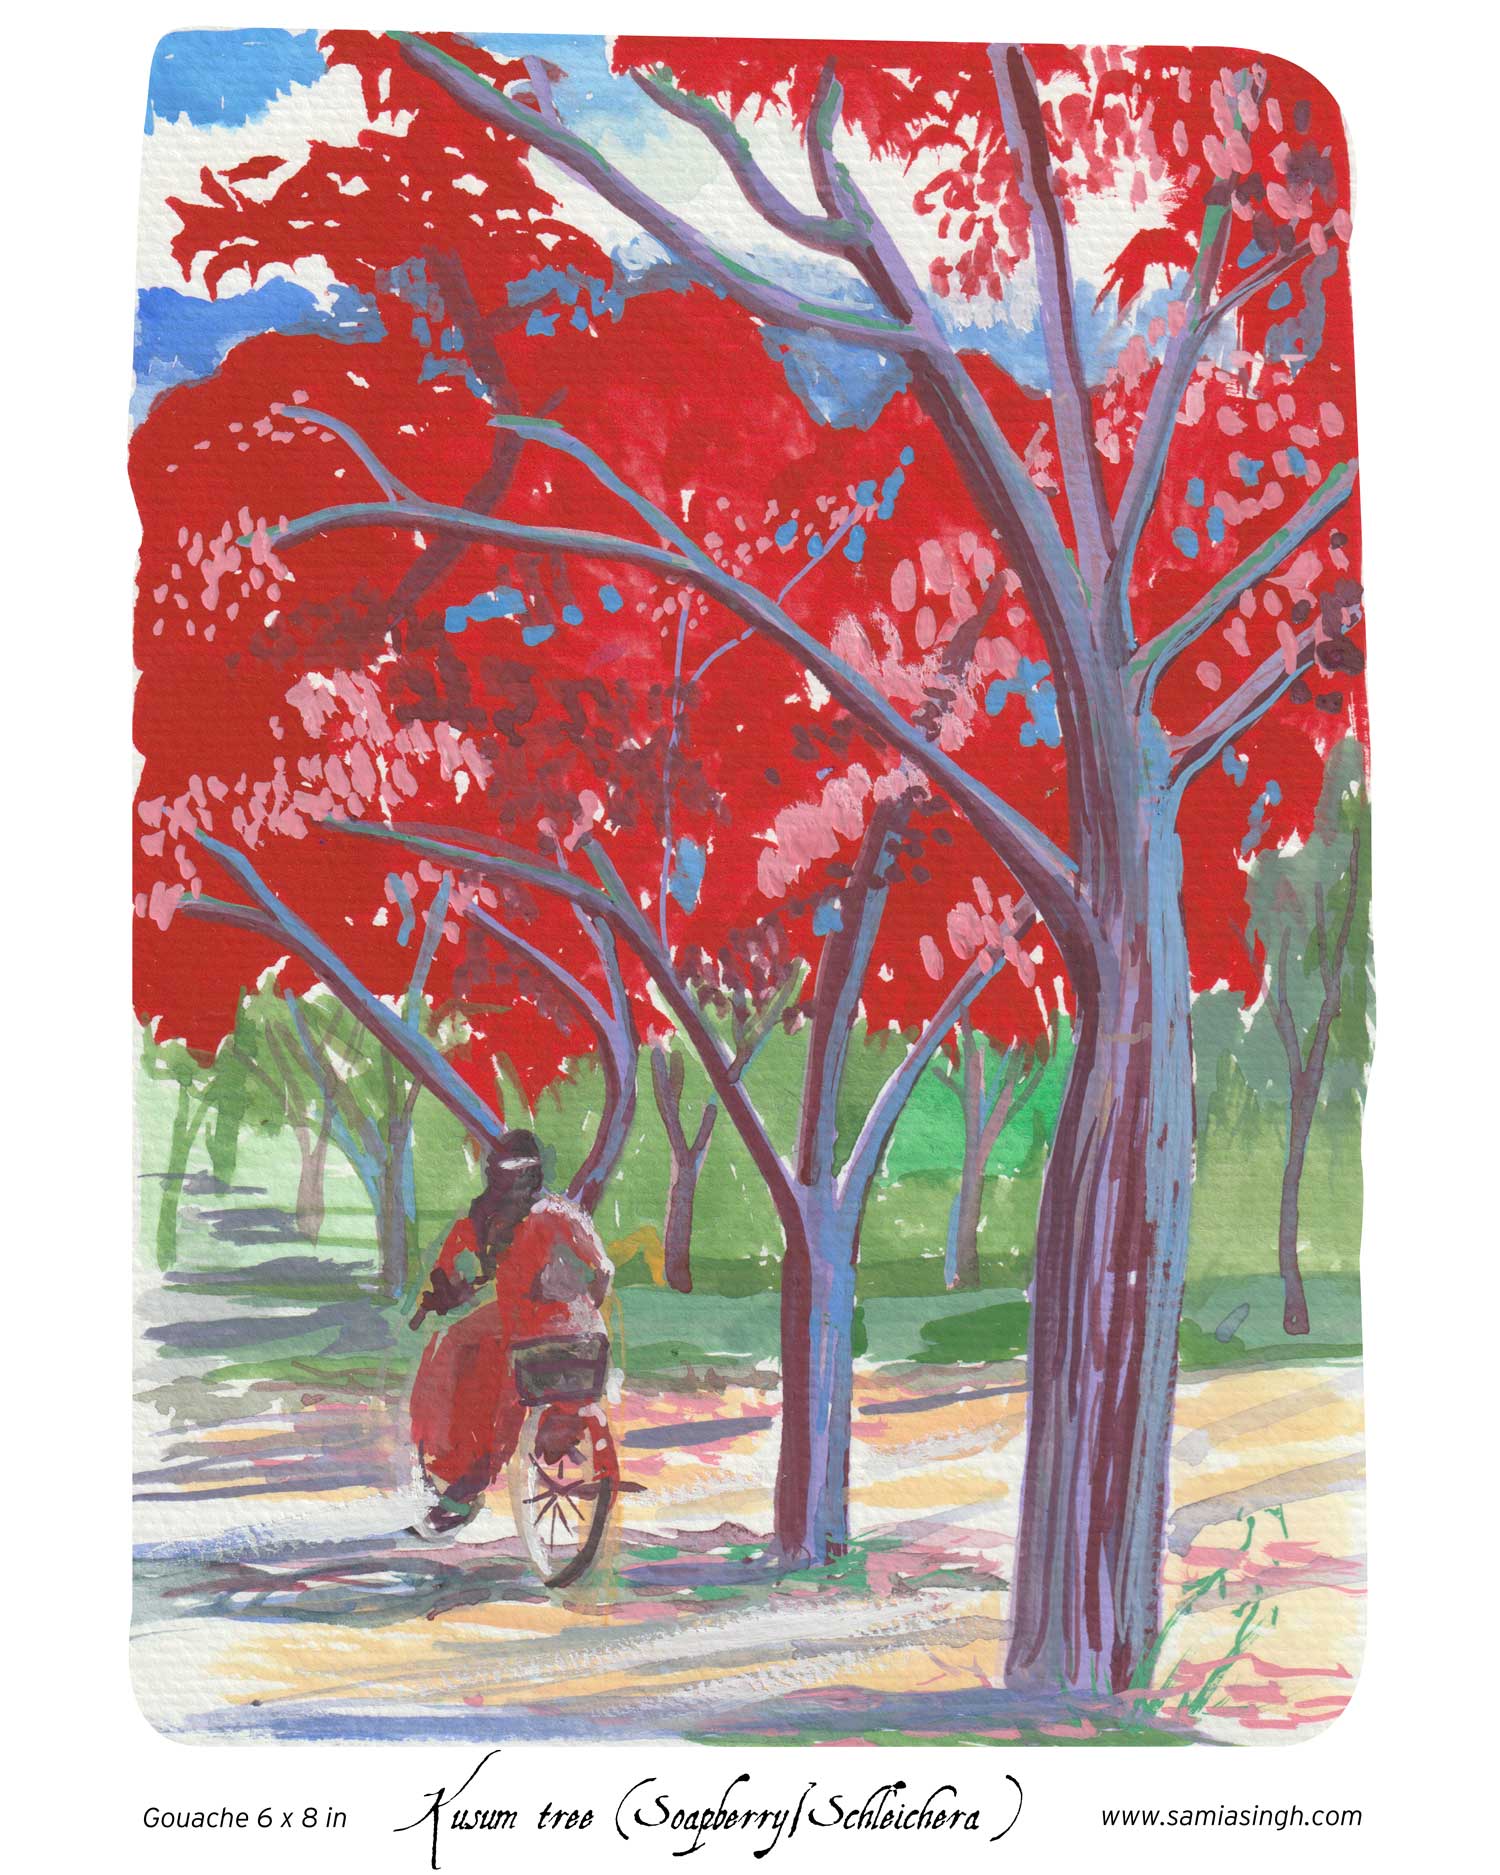 The new leaves of the Kusum tree are bright red. My nani, Sheila Didi, a barrister who studied at Lincoln’s Inn, London, used to cycle to the high court in a sari. I imagine she would have passed beneath these very trees on a summer day like this. What does a tree remind you of?